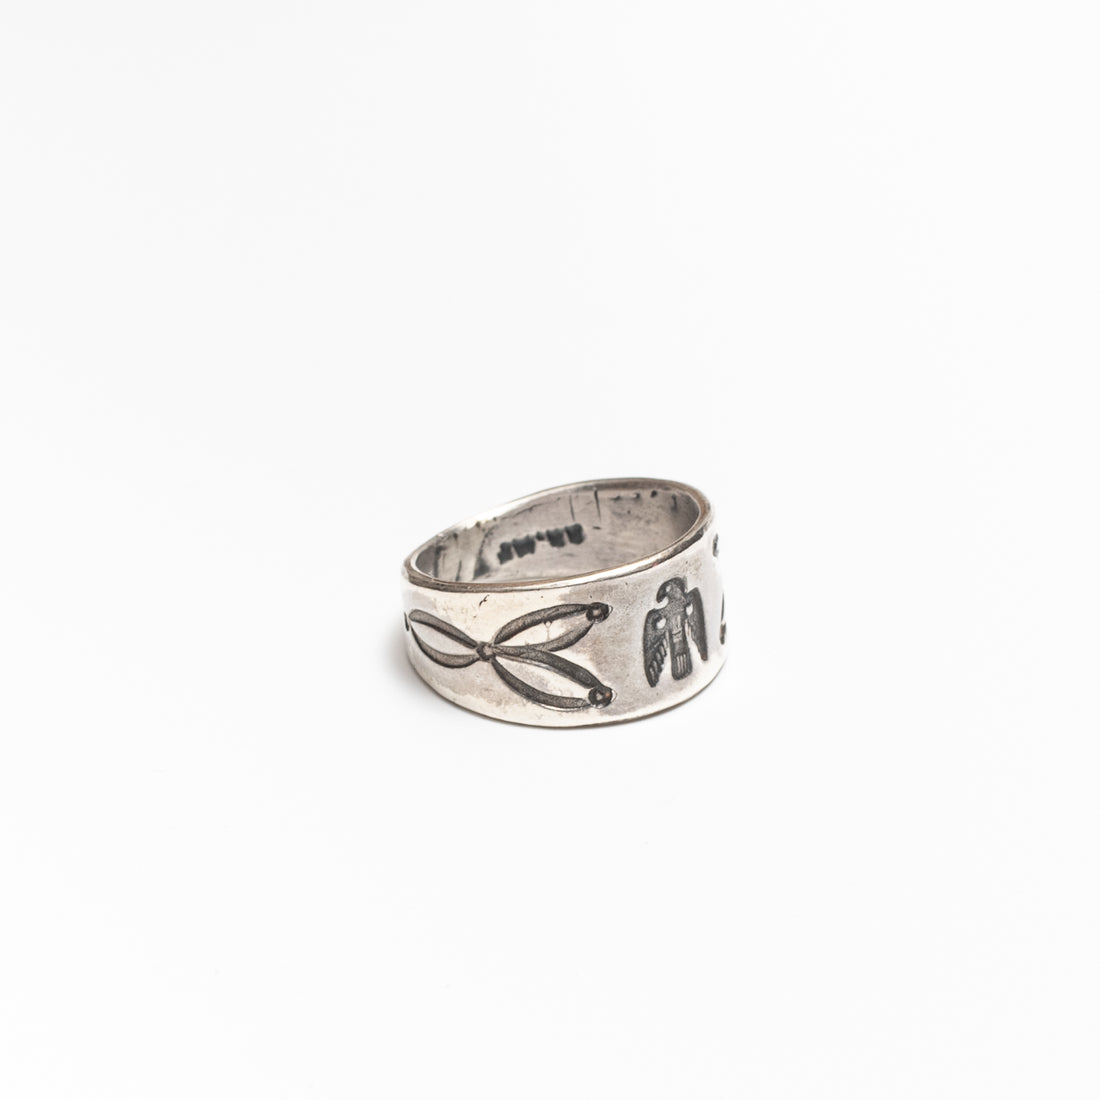 Red Rabbit Trading Co. Fly True Sterling Band Ring